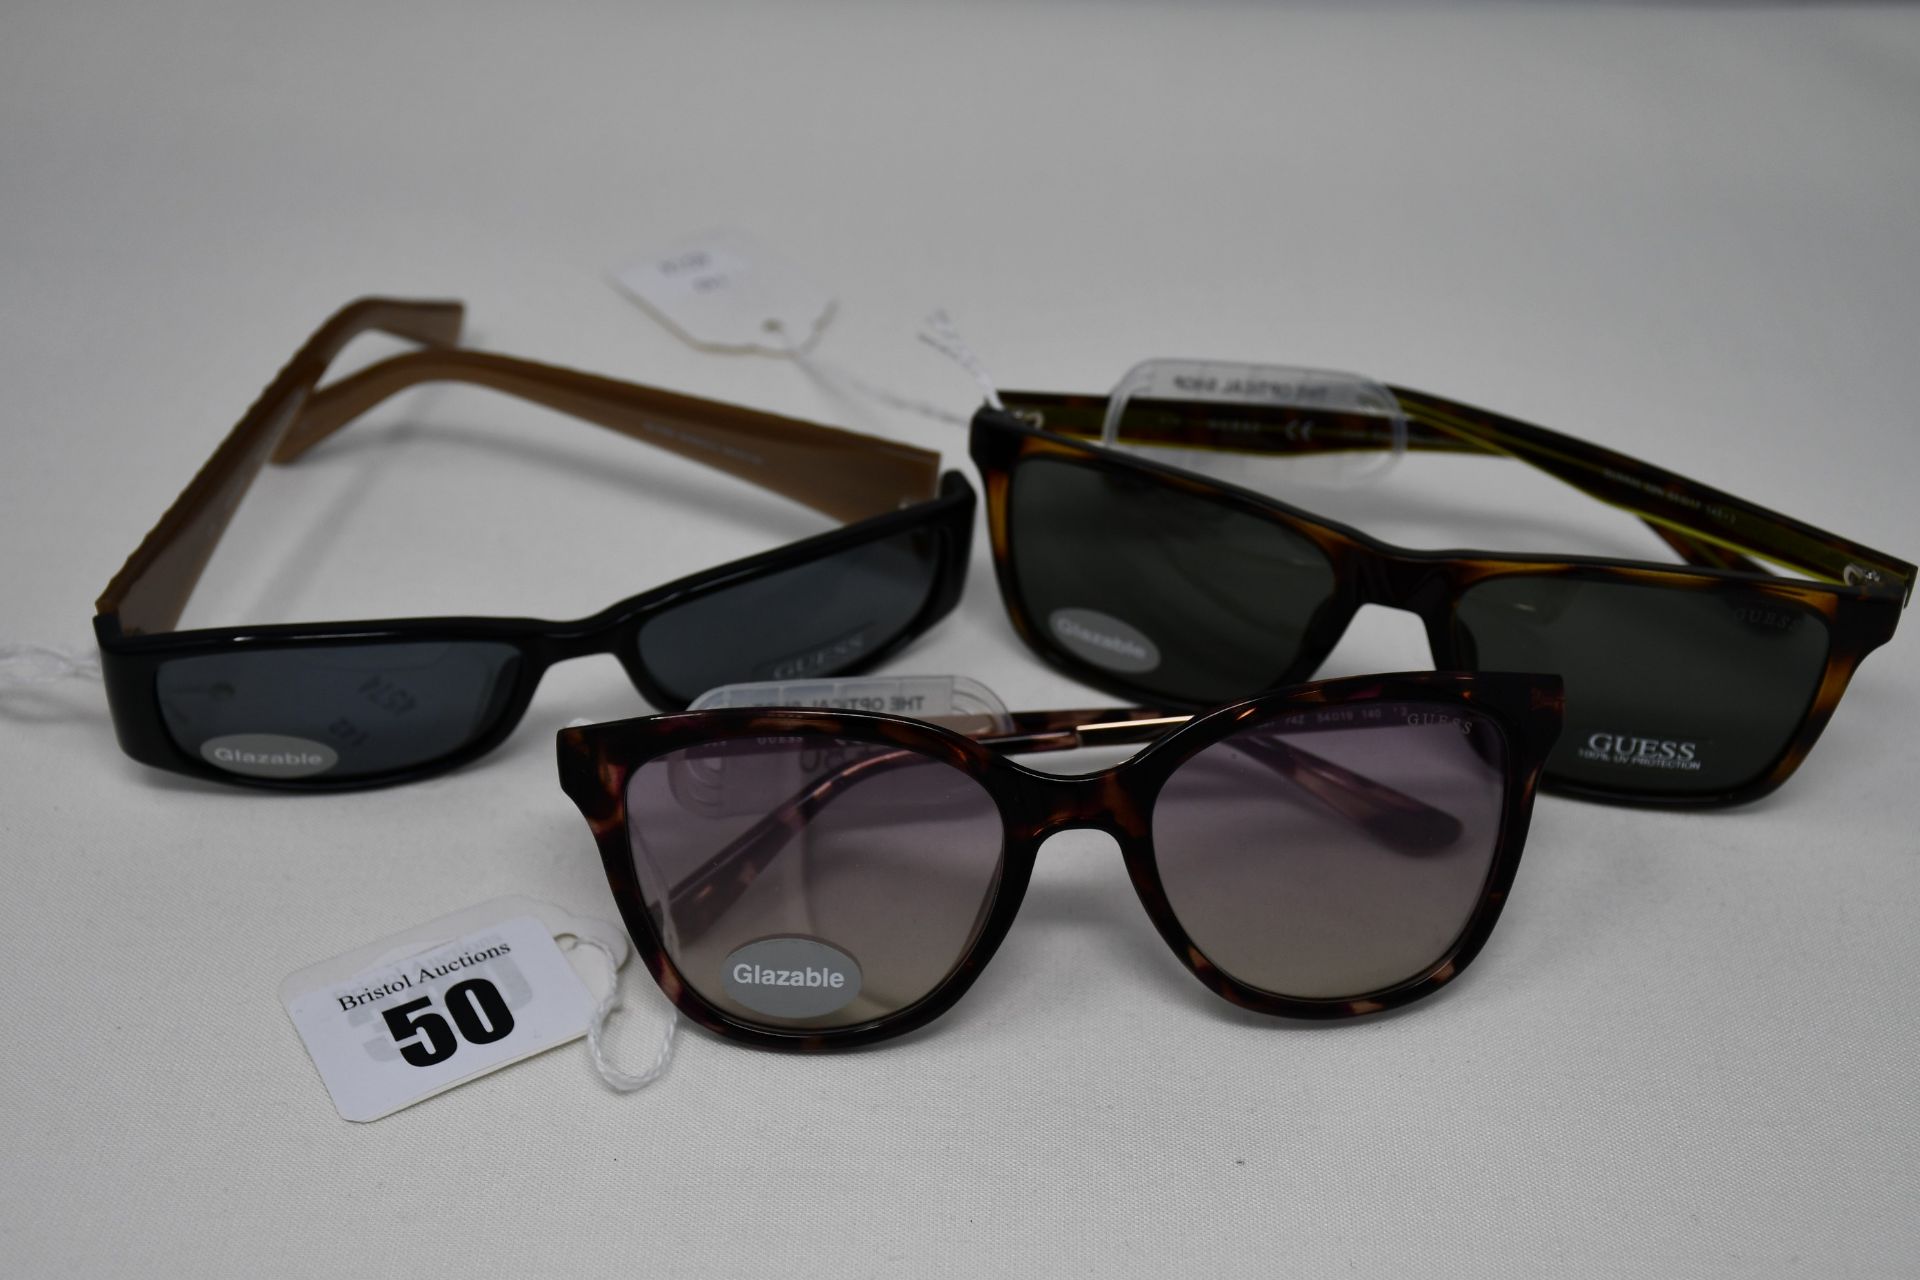 Three pairs of as new Guess sunglasses.